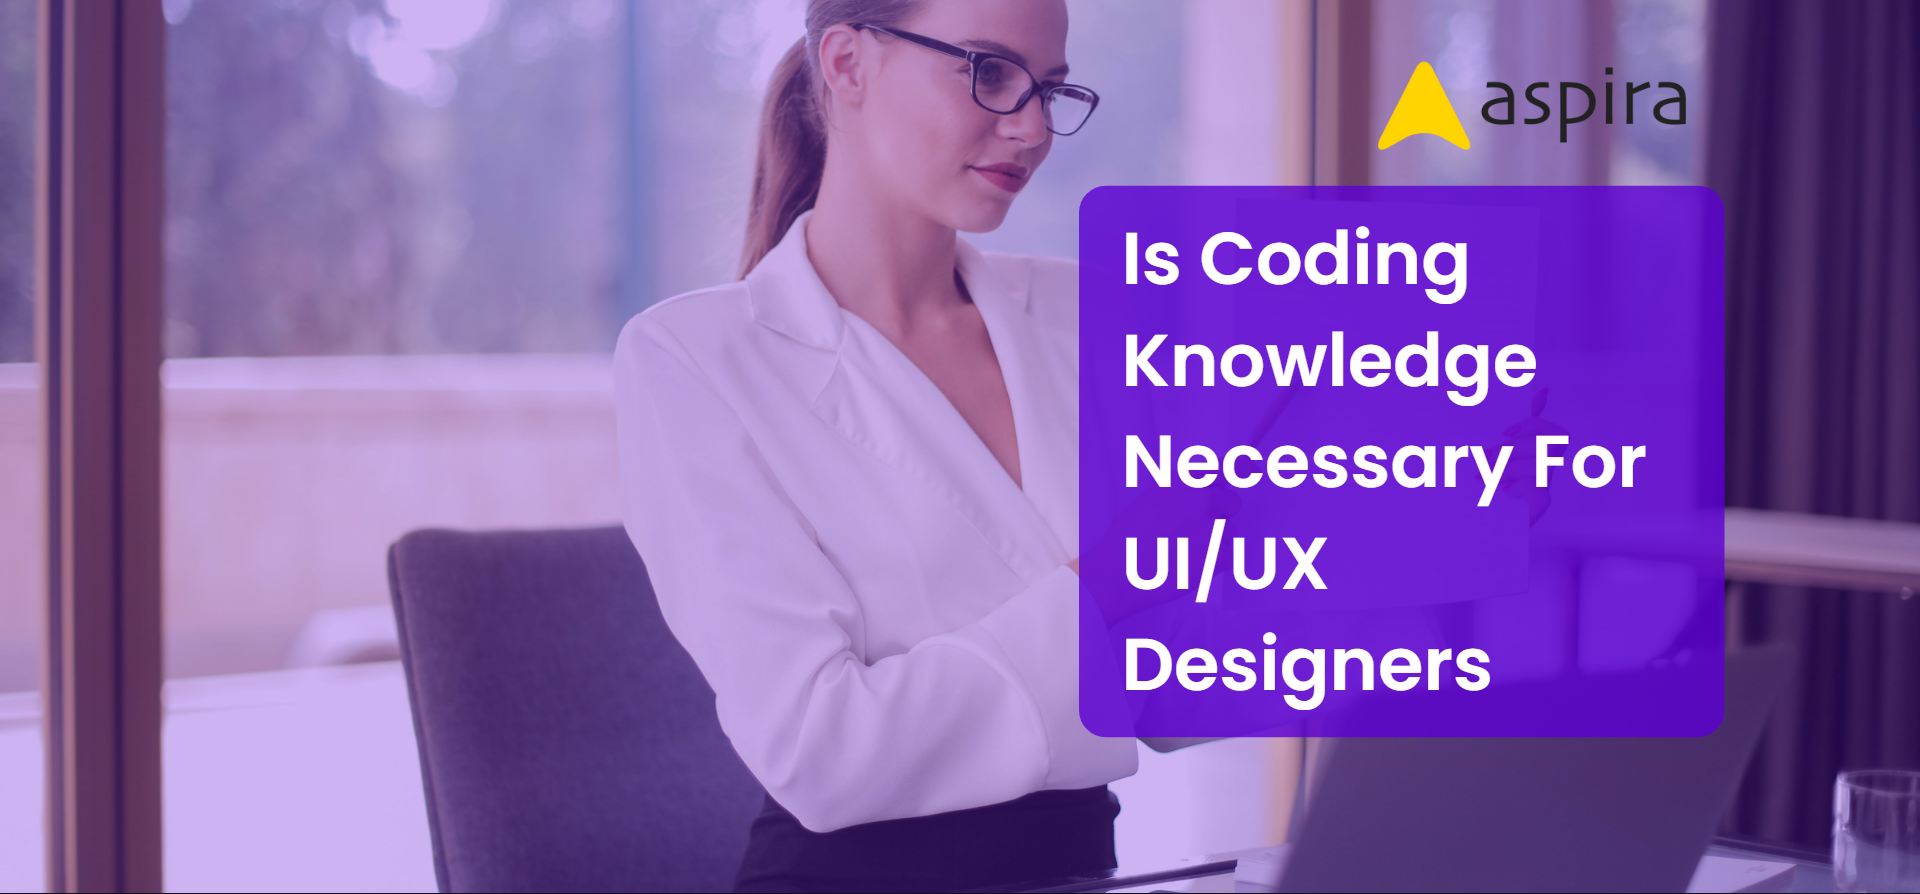 Is coding knowledge necessary for UI UX designers?